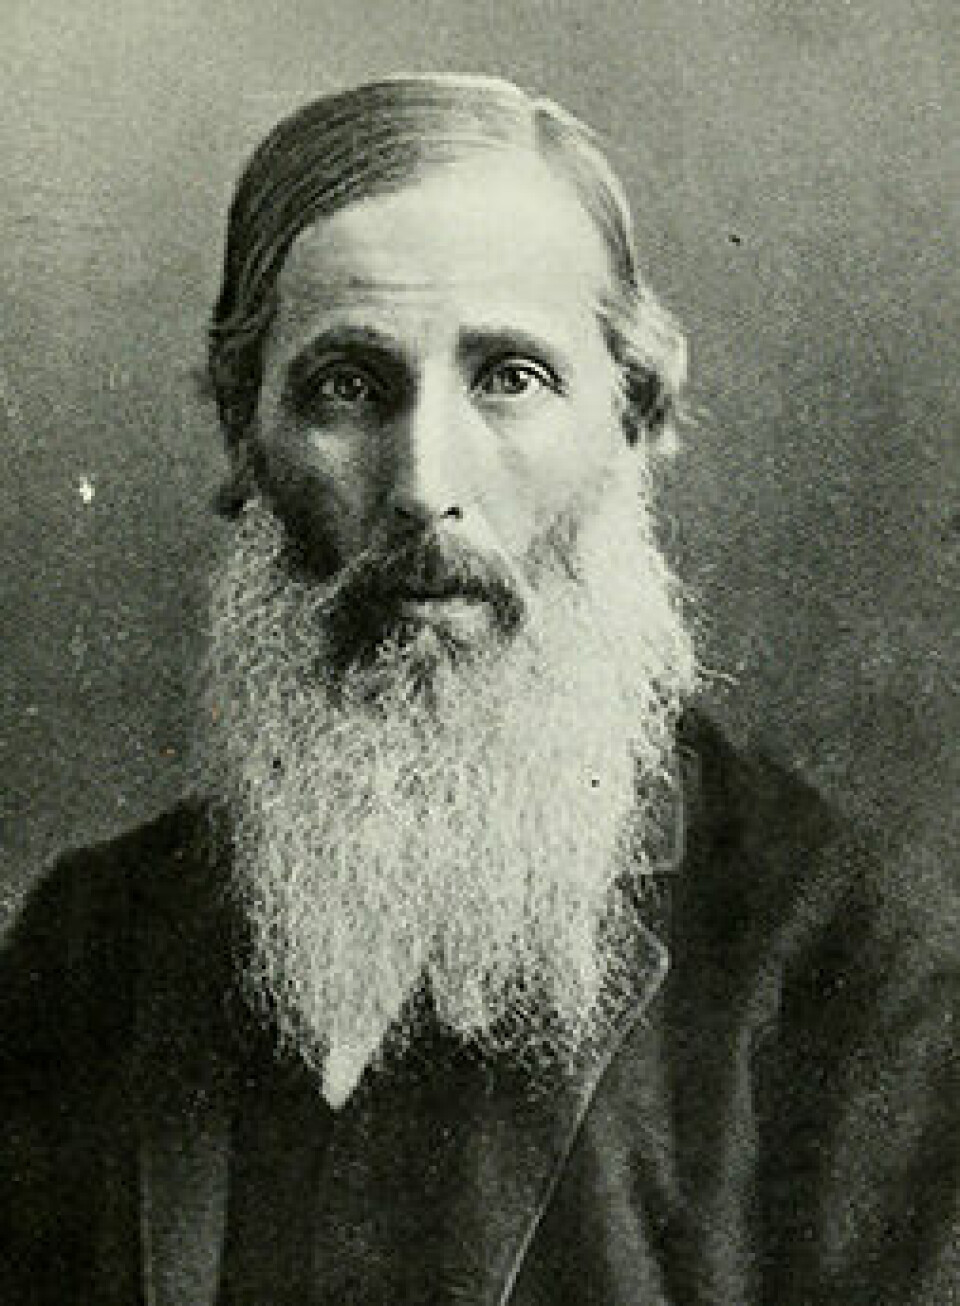 The English philosopher Henry Sidgwick could not prove that it is more irrational to act in favour of oneself than than out of morality. This paradox was the starting point for the research project PROFOUND.